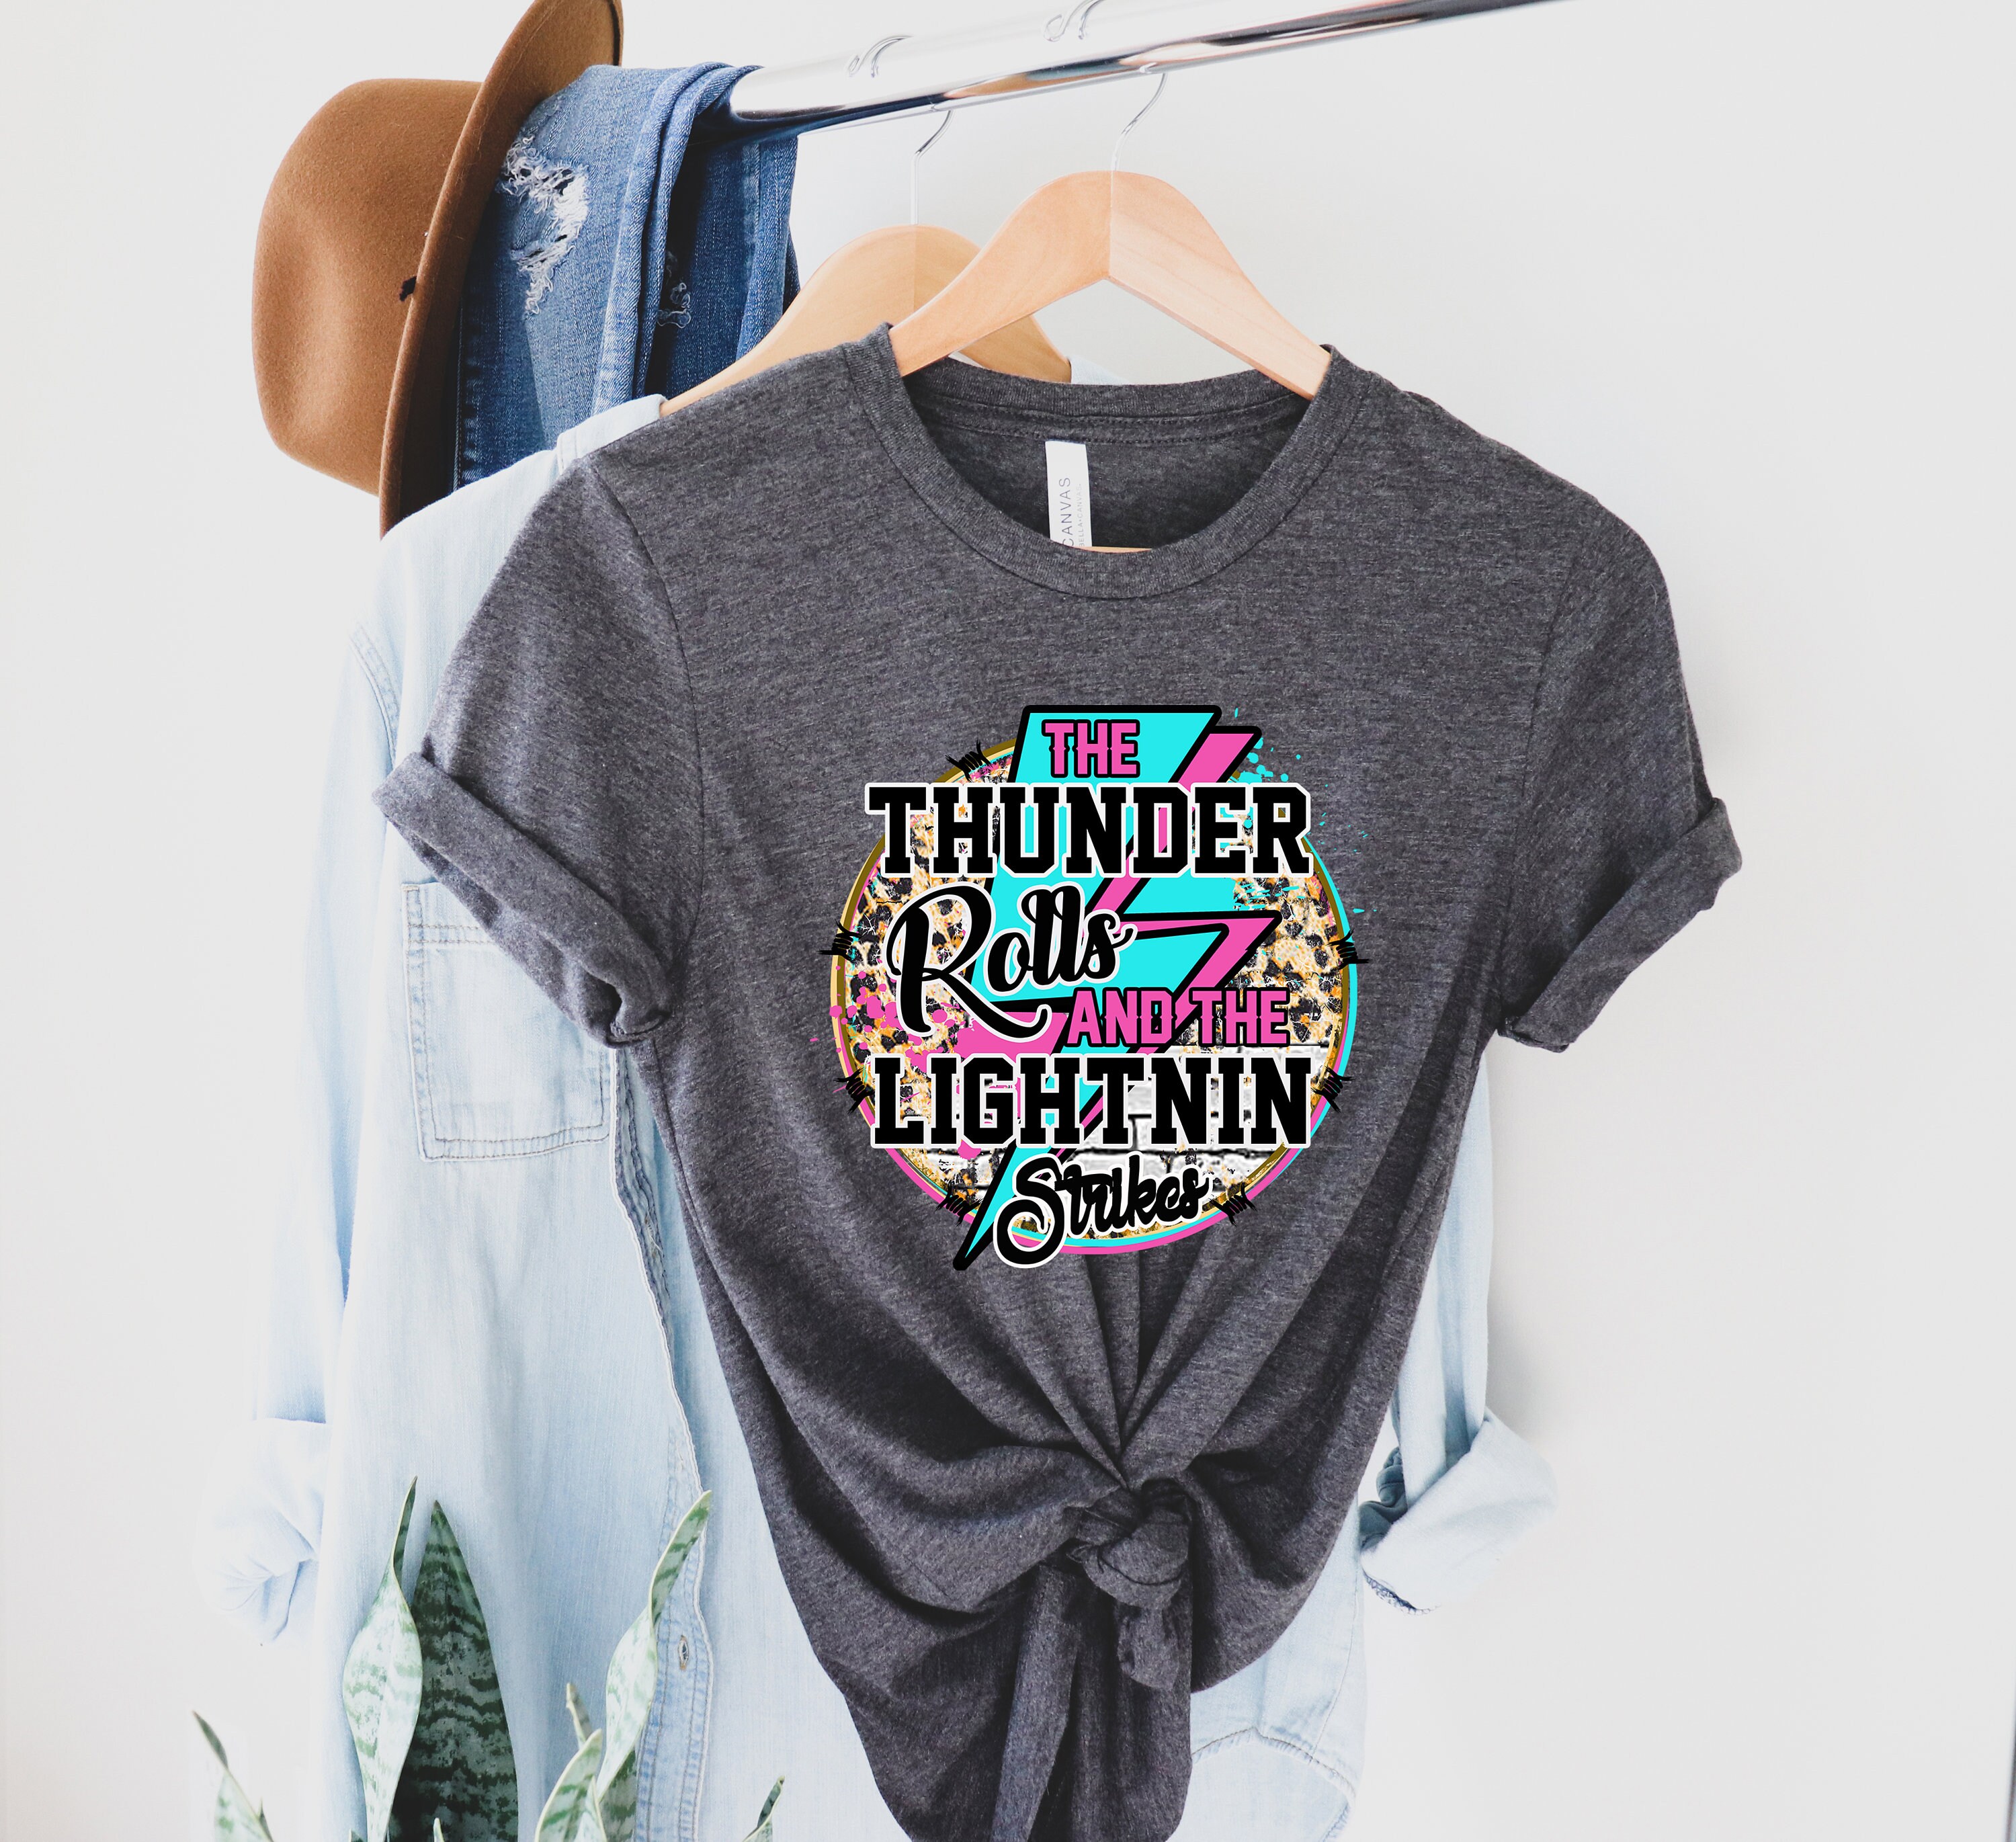 MNLYBABY Country Music Shirt Women The Thunder Rolls and The Lightning Strikes Tees Western Concert Tshirt Top